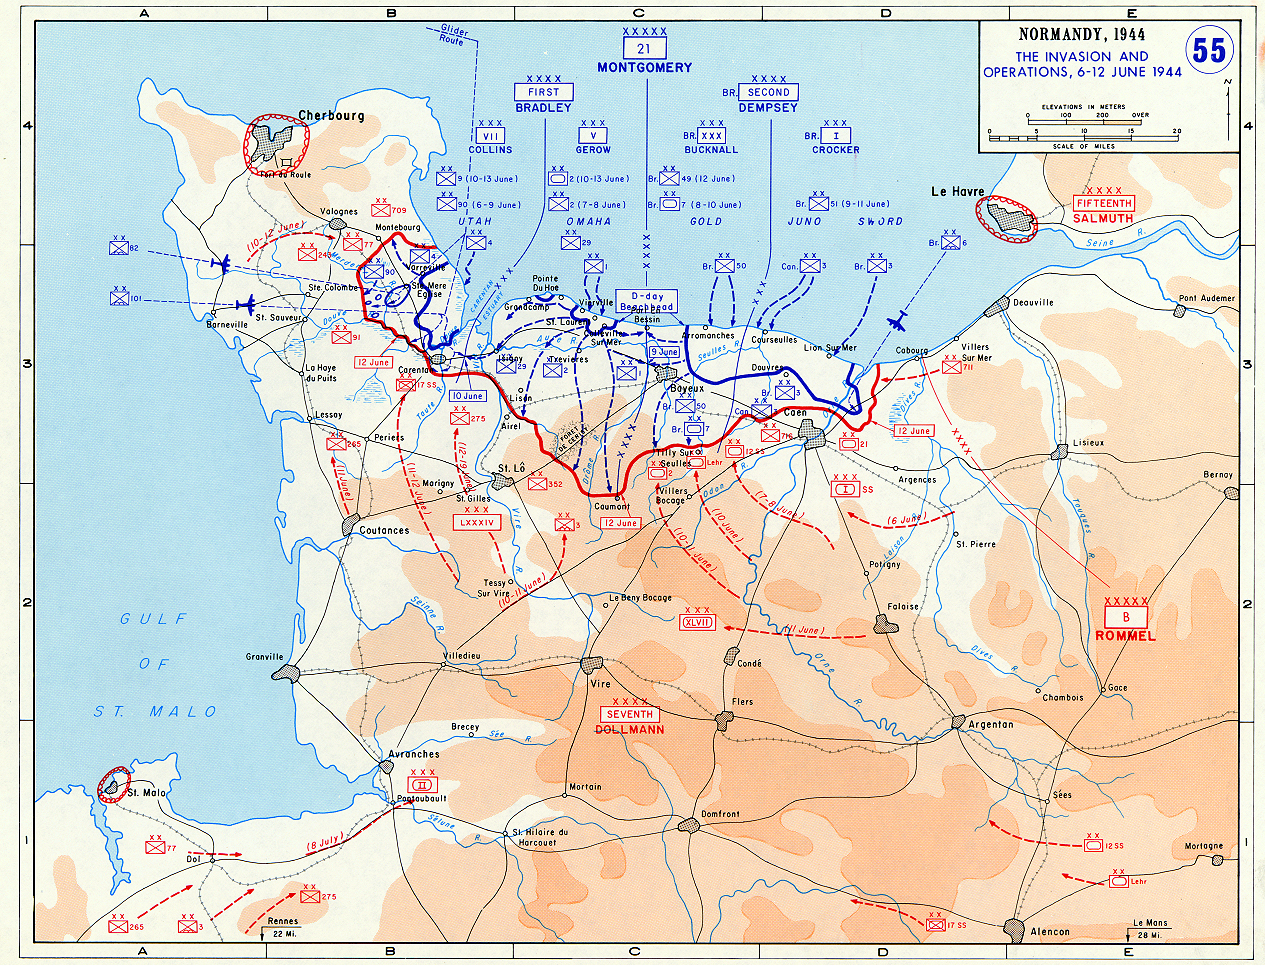 DDay Landing Beaches Normandy Landings Wikipedia Best price and